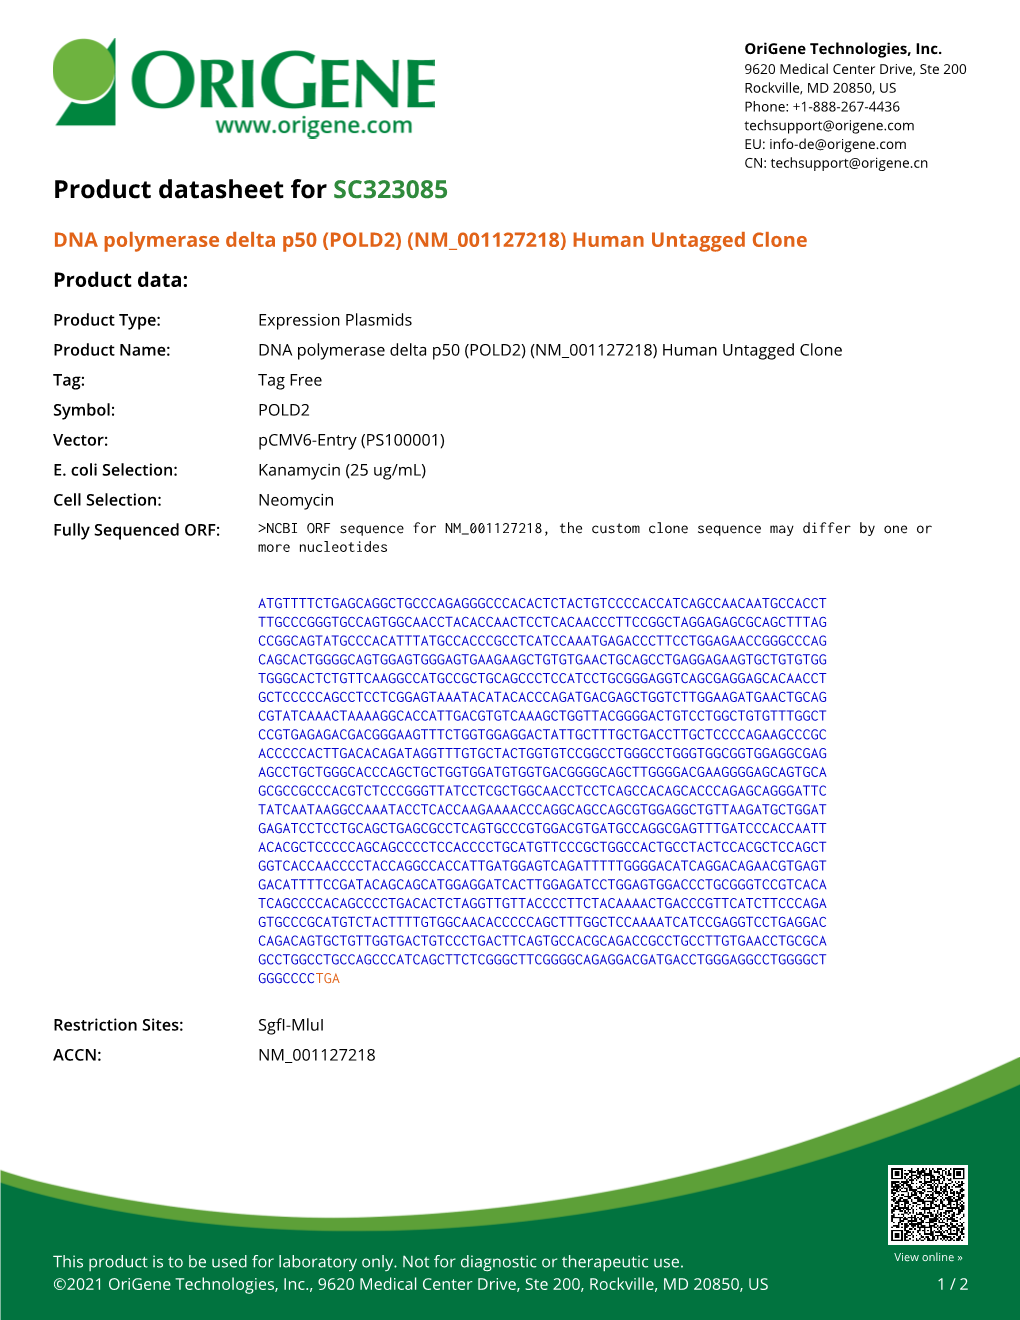 DNA Polymerase Delta P50 (POLD2) (NM 001127218) Human Untagged Clone Product Data